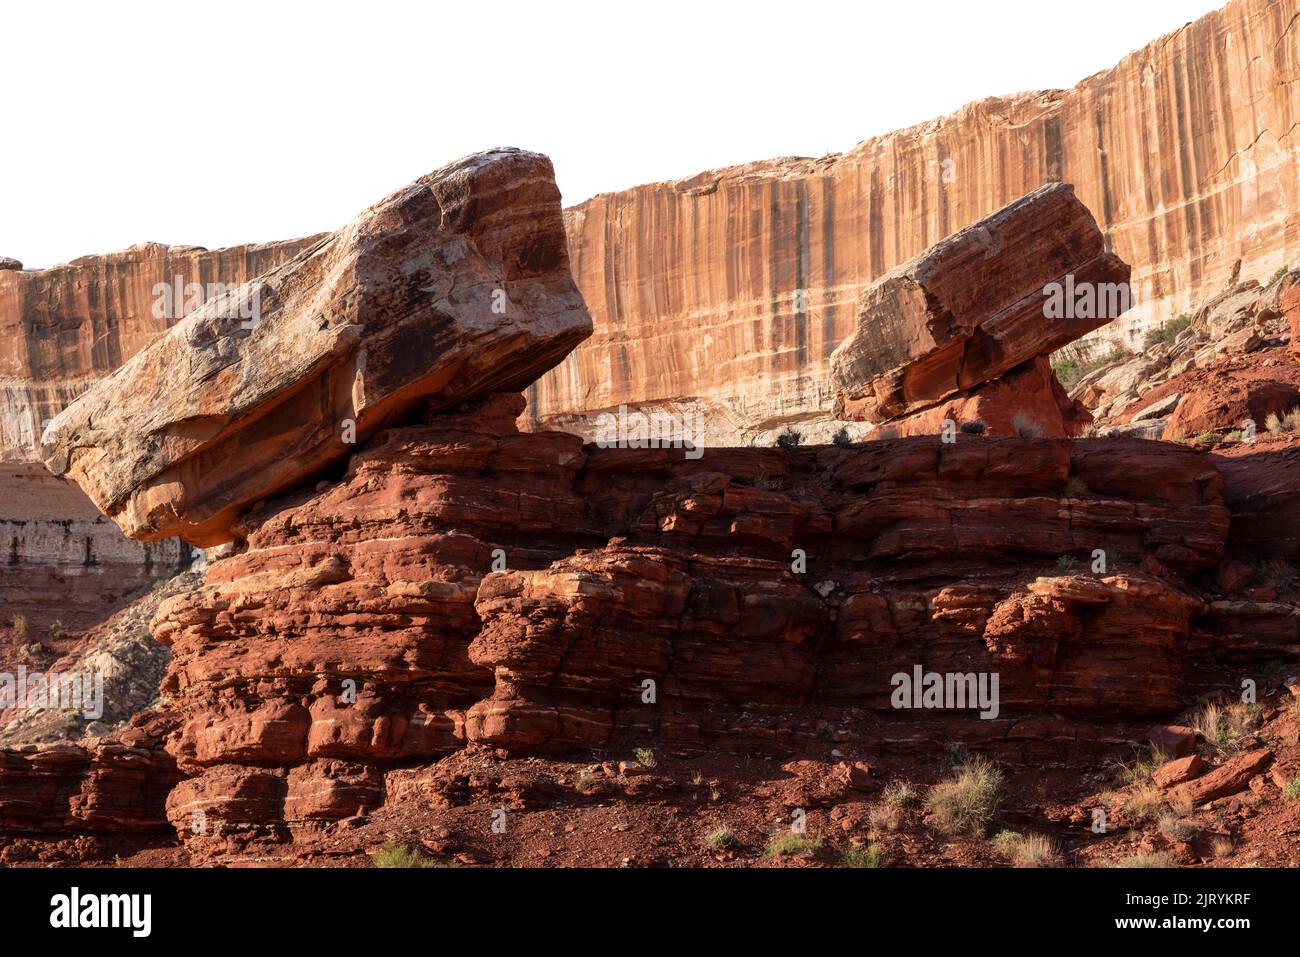 Boulders and cliff, Canyonlands National Park, Utah. Stock Photo